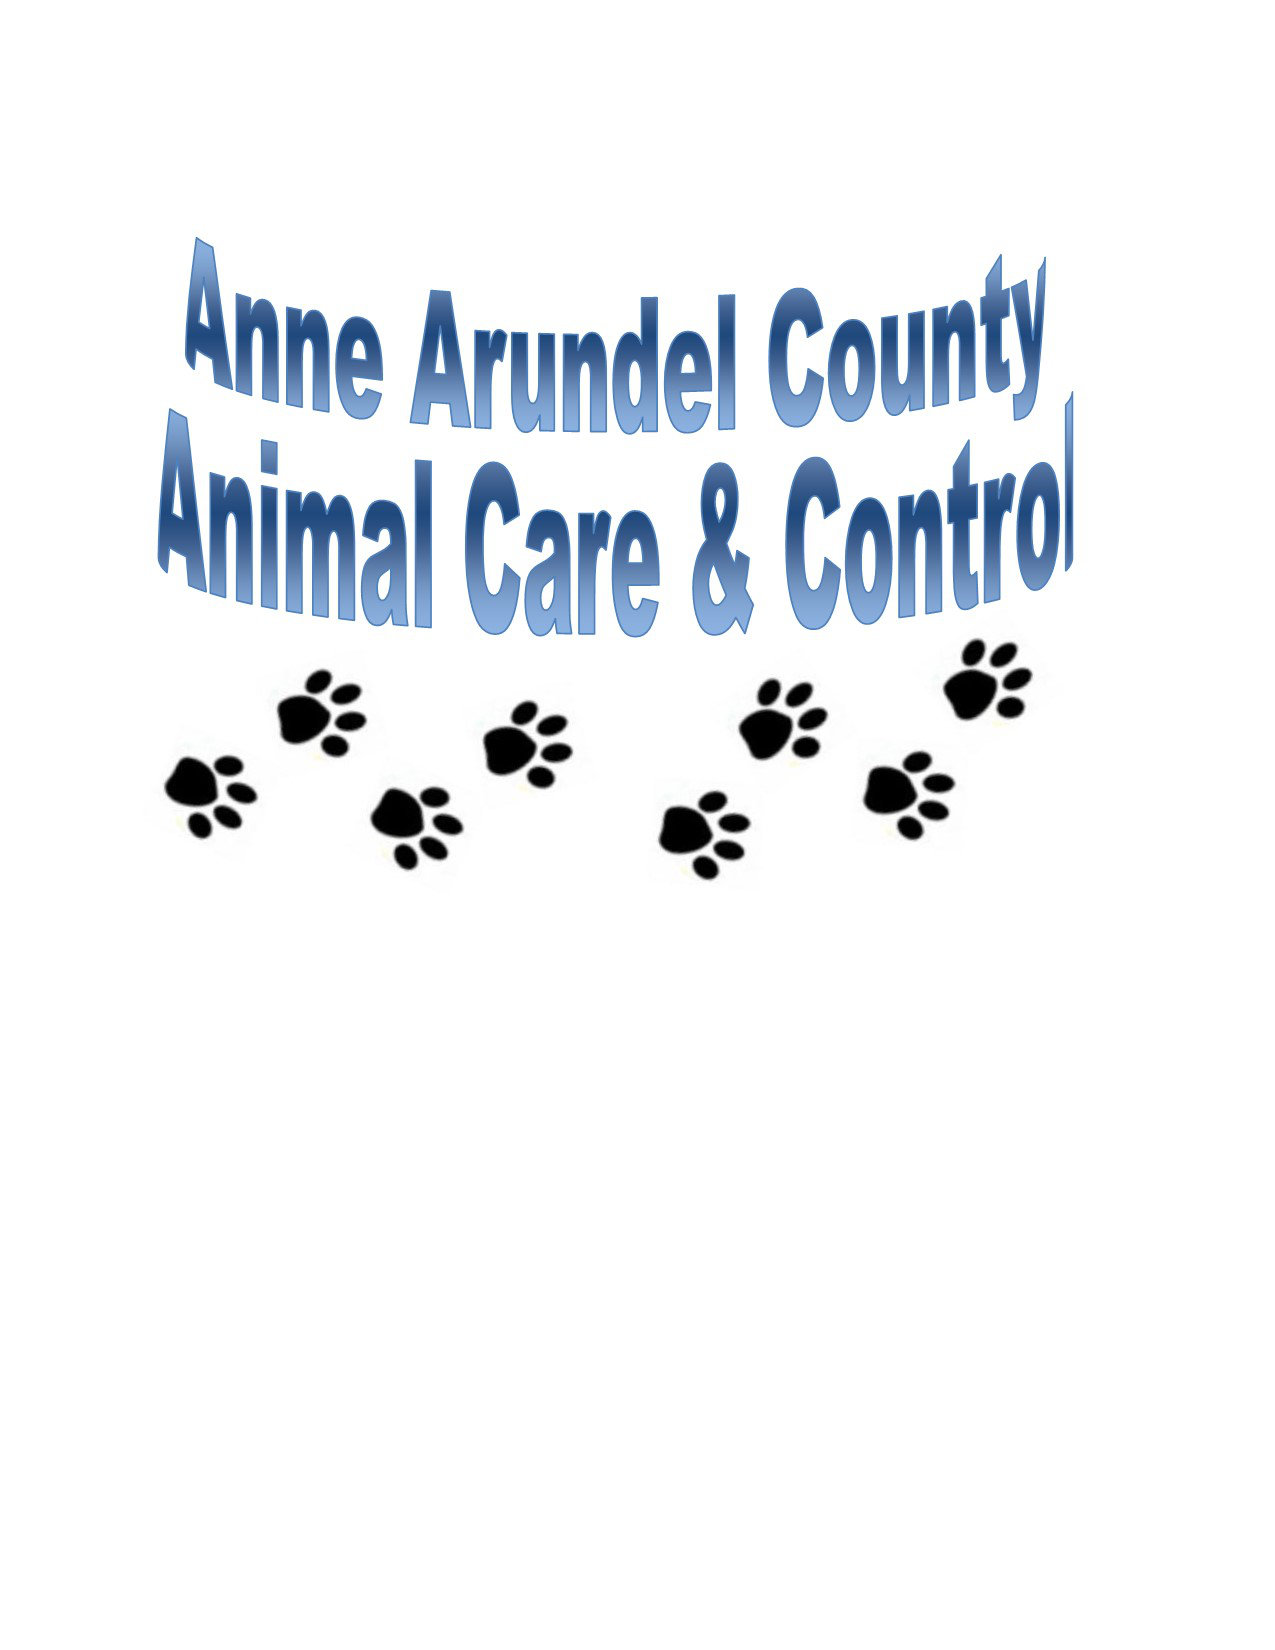 Logo for Anne Arundel County Animal Care & Control